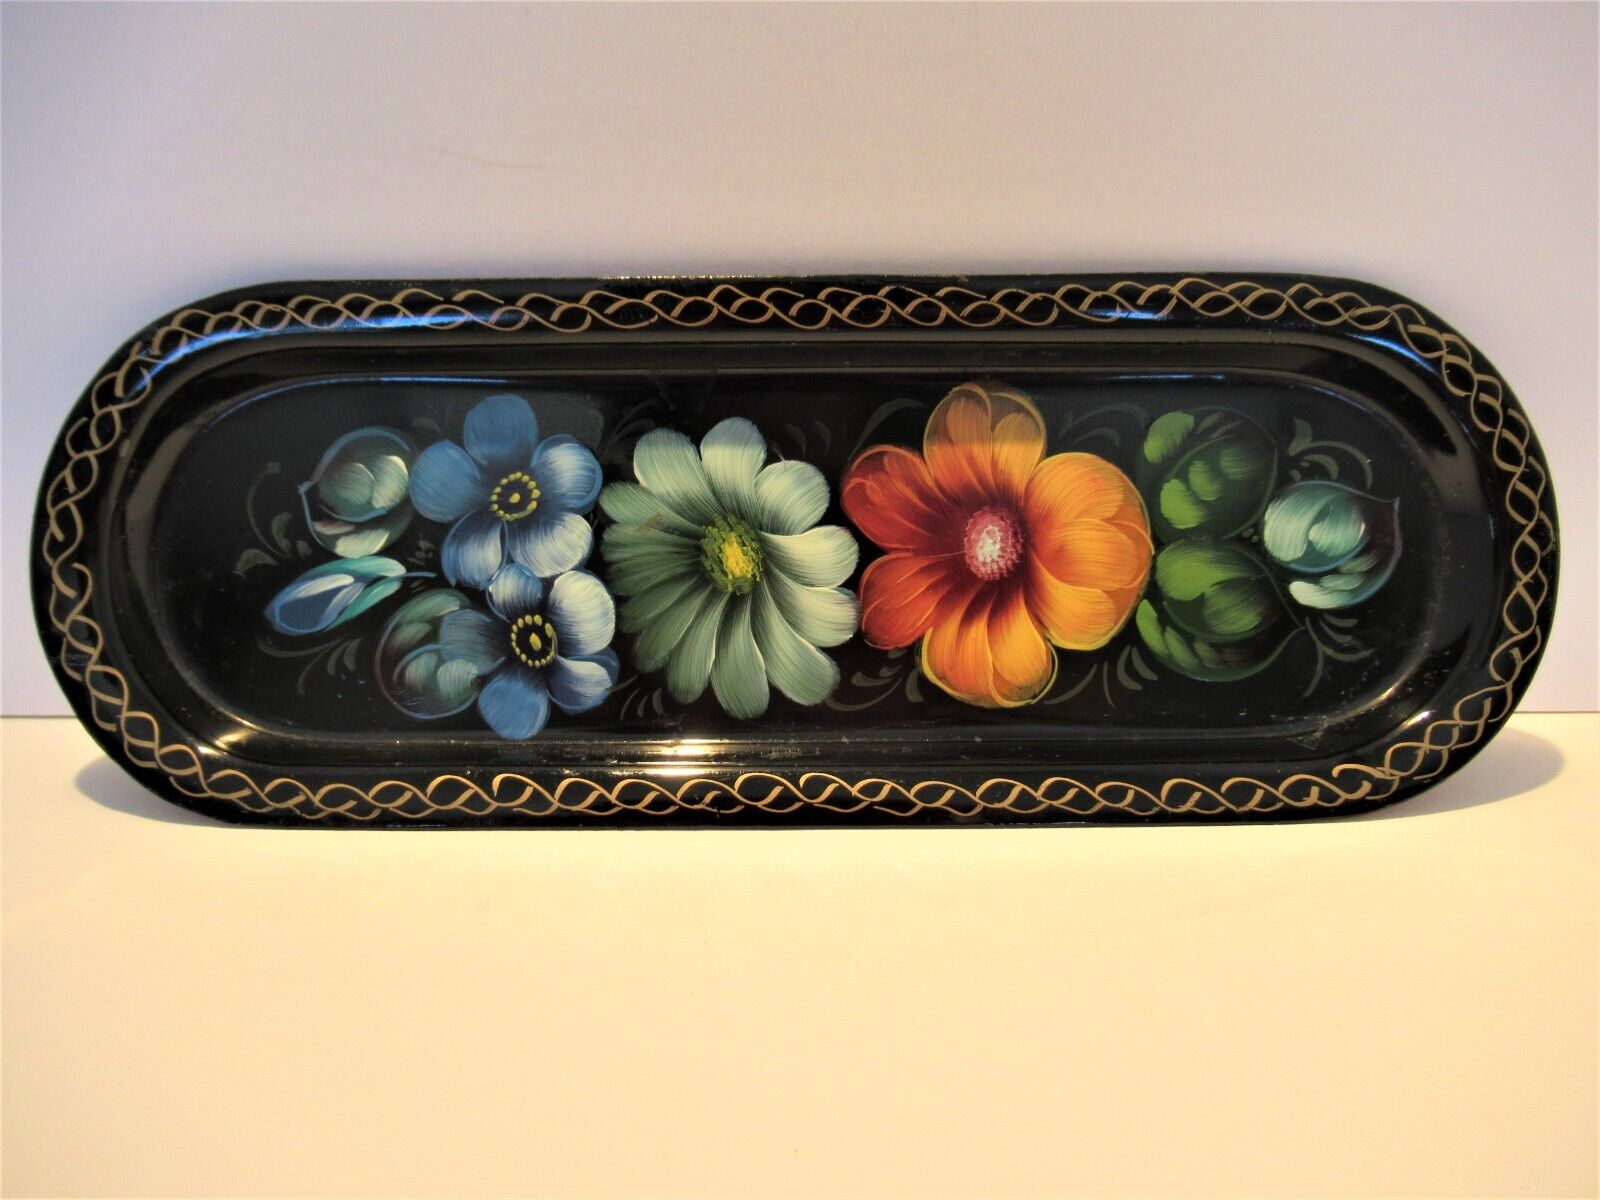 Vibrant Hand Painted Toleware Oval Trinket Tray Flowers Floral Gold Trim